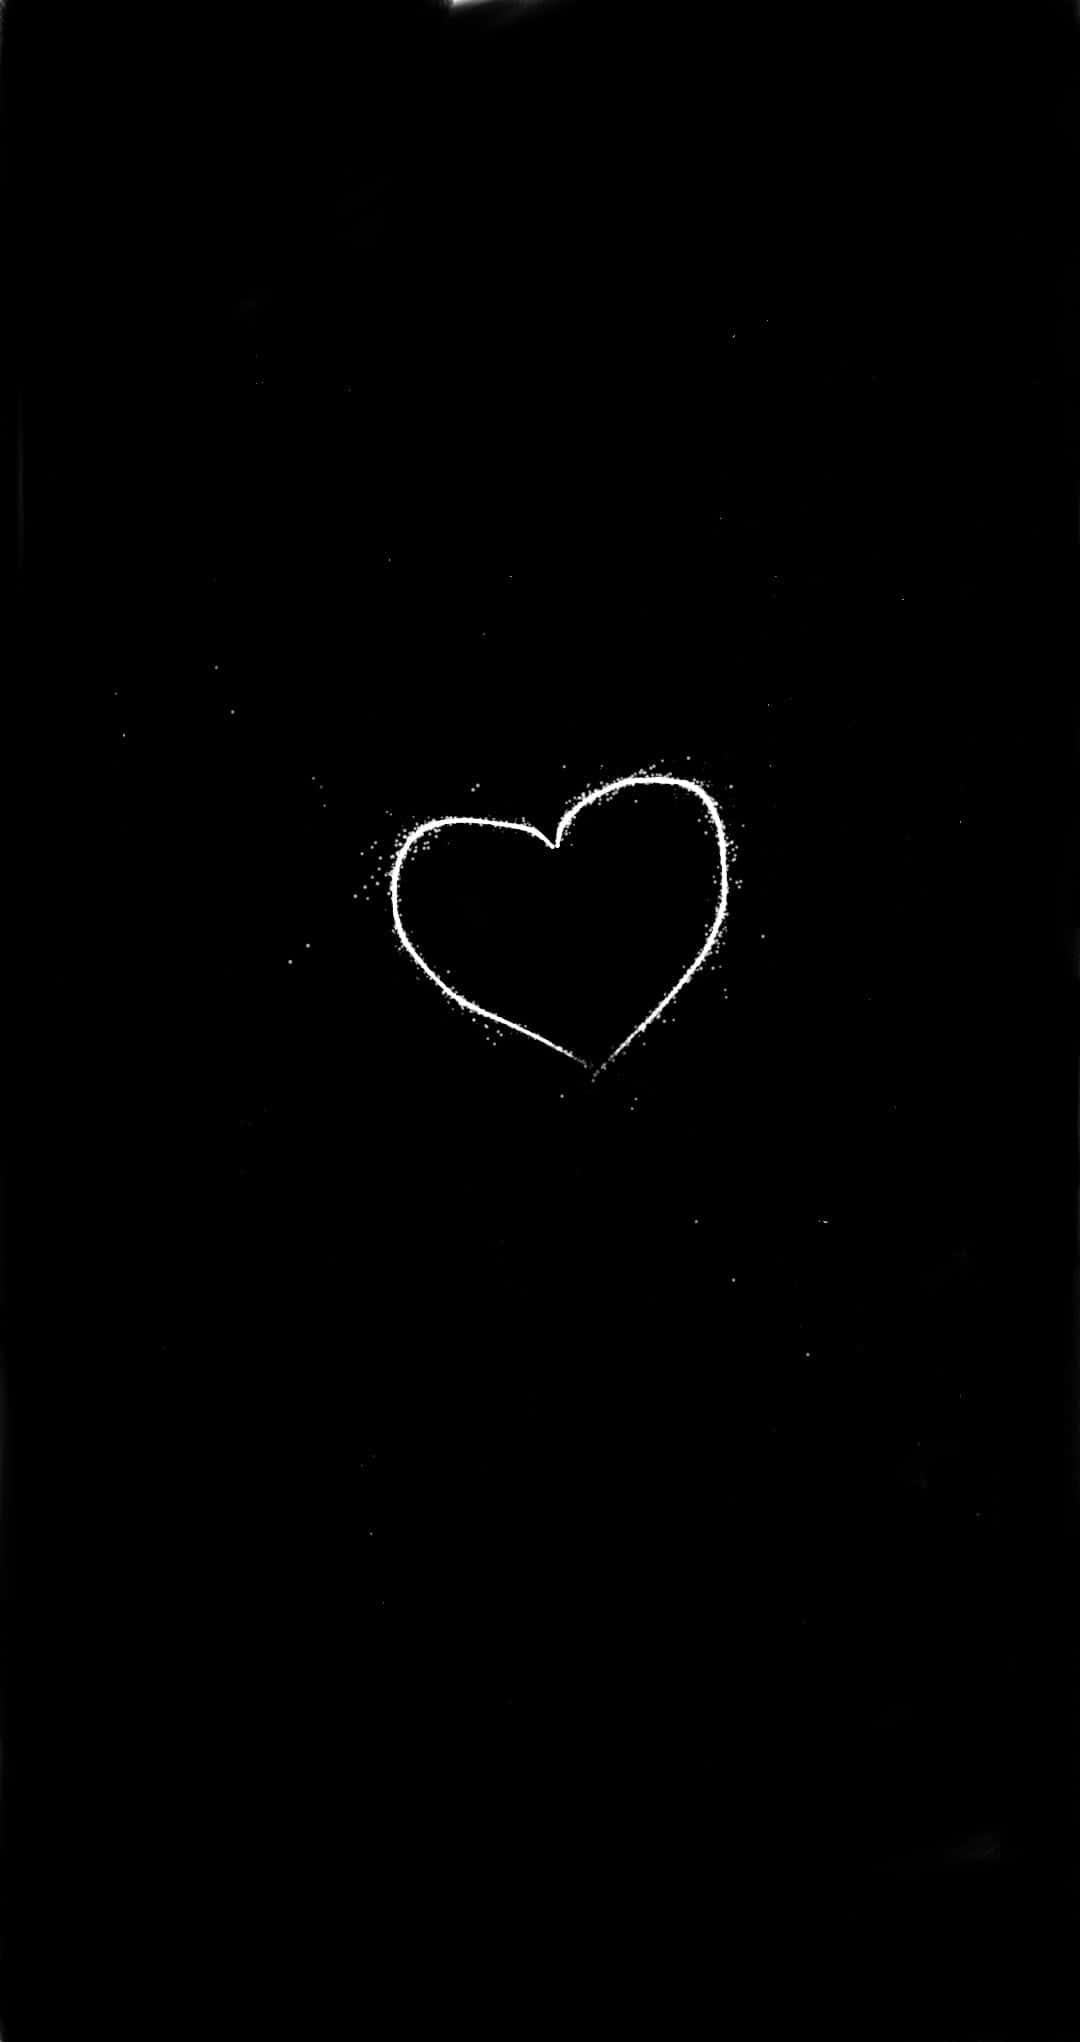 Broken Black Heart Images  Free Photos, PNG Stickers, Wallpapers